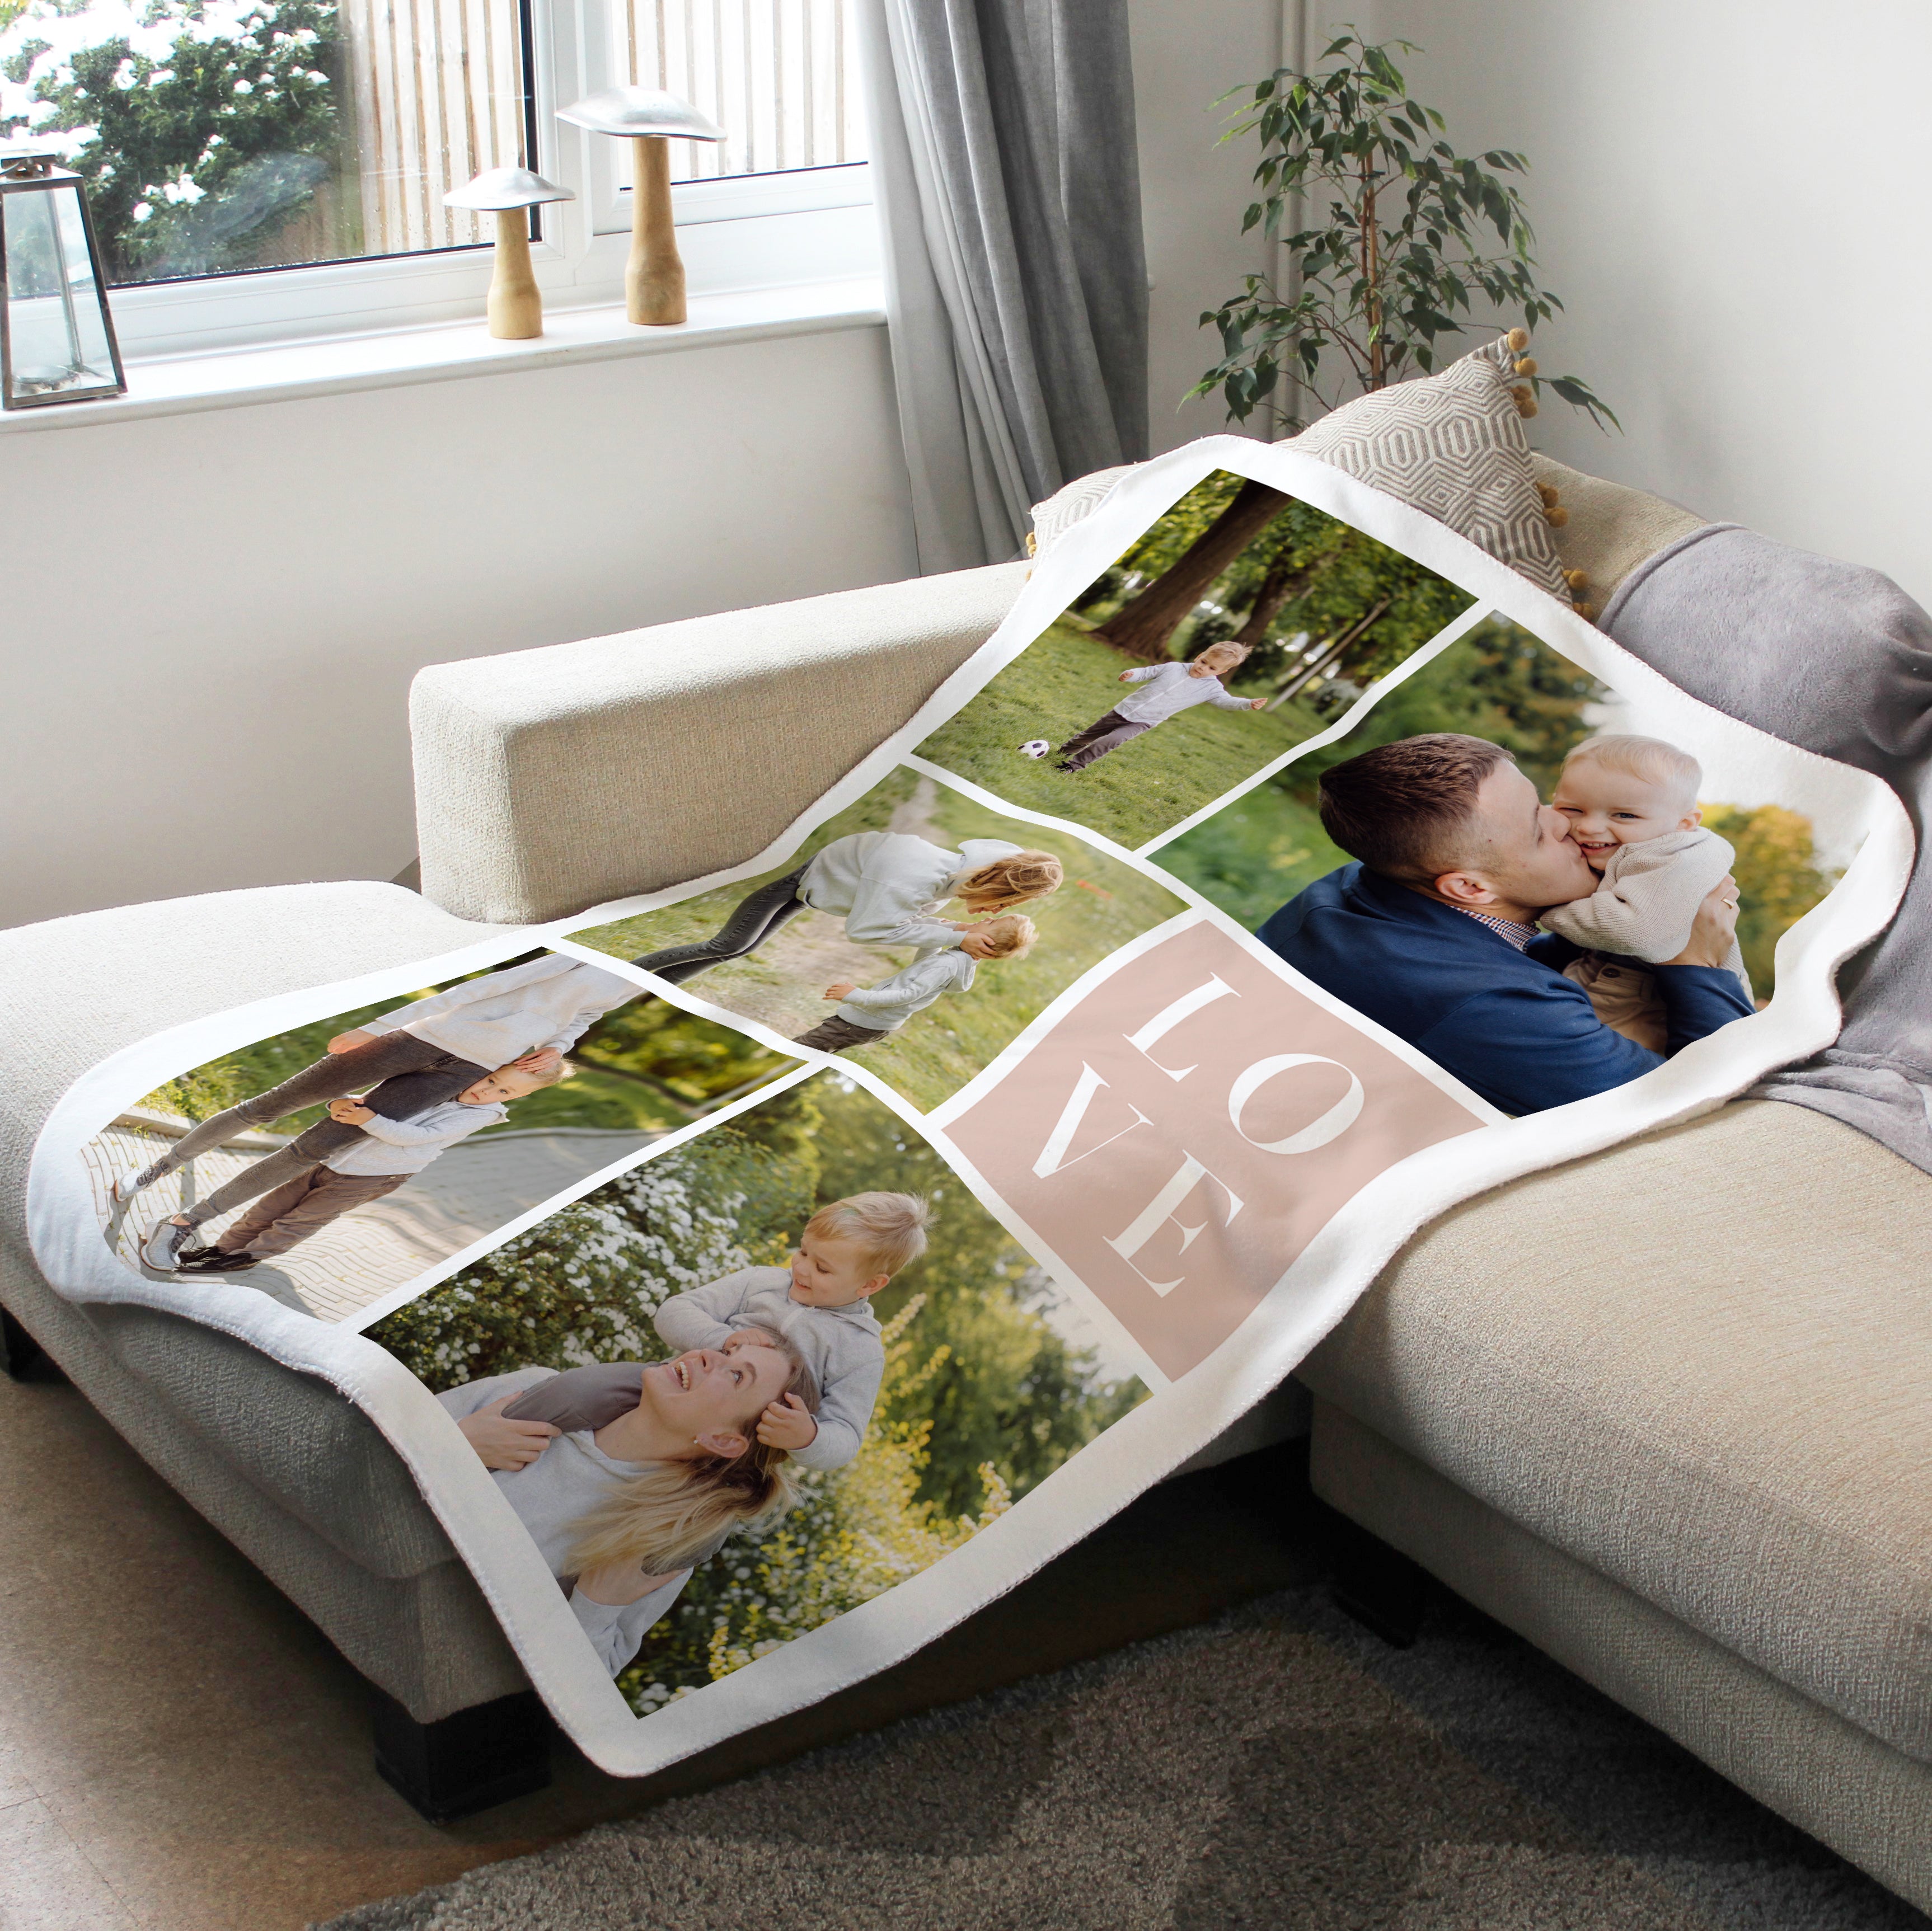 Five Photo Blanket - Love Collage